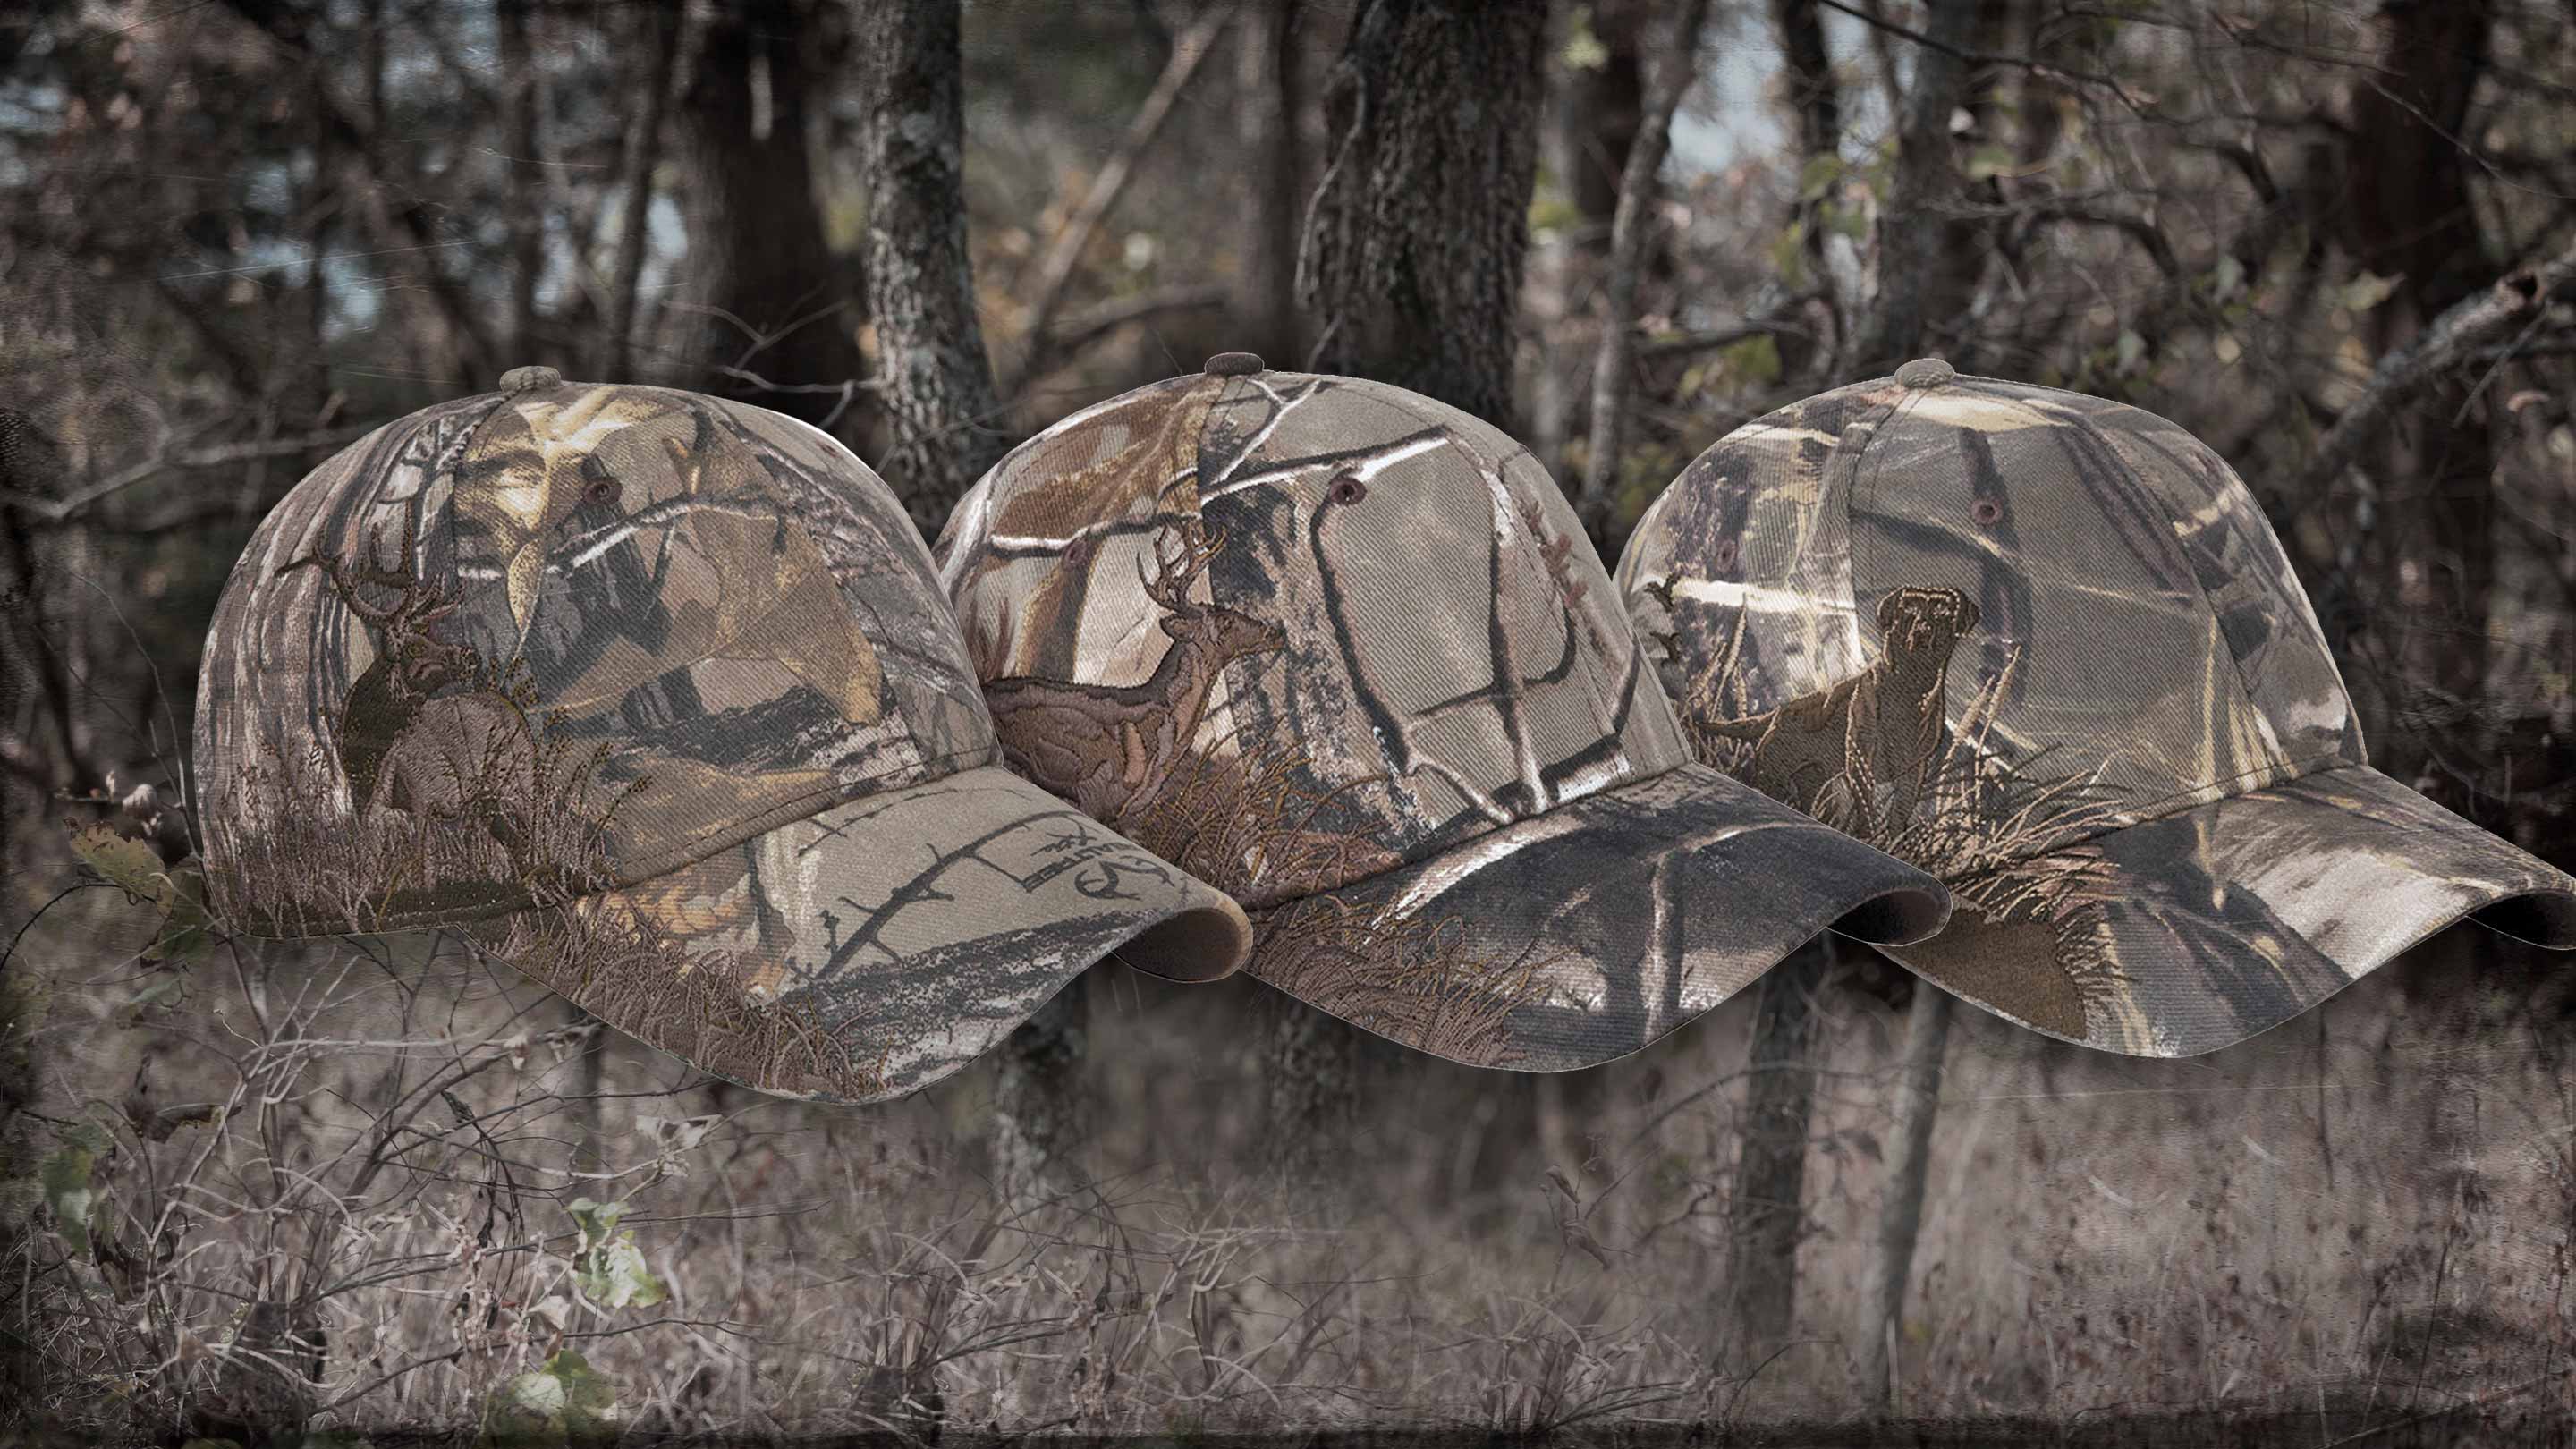 Realtree Canvas Hats for Men